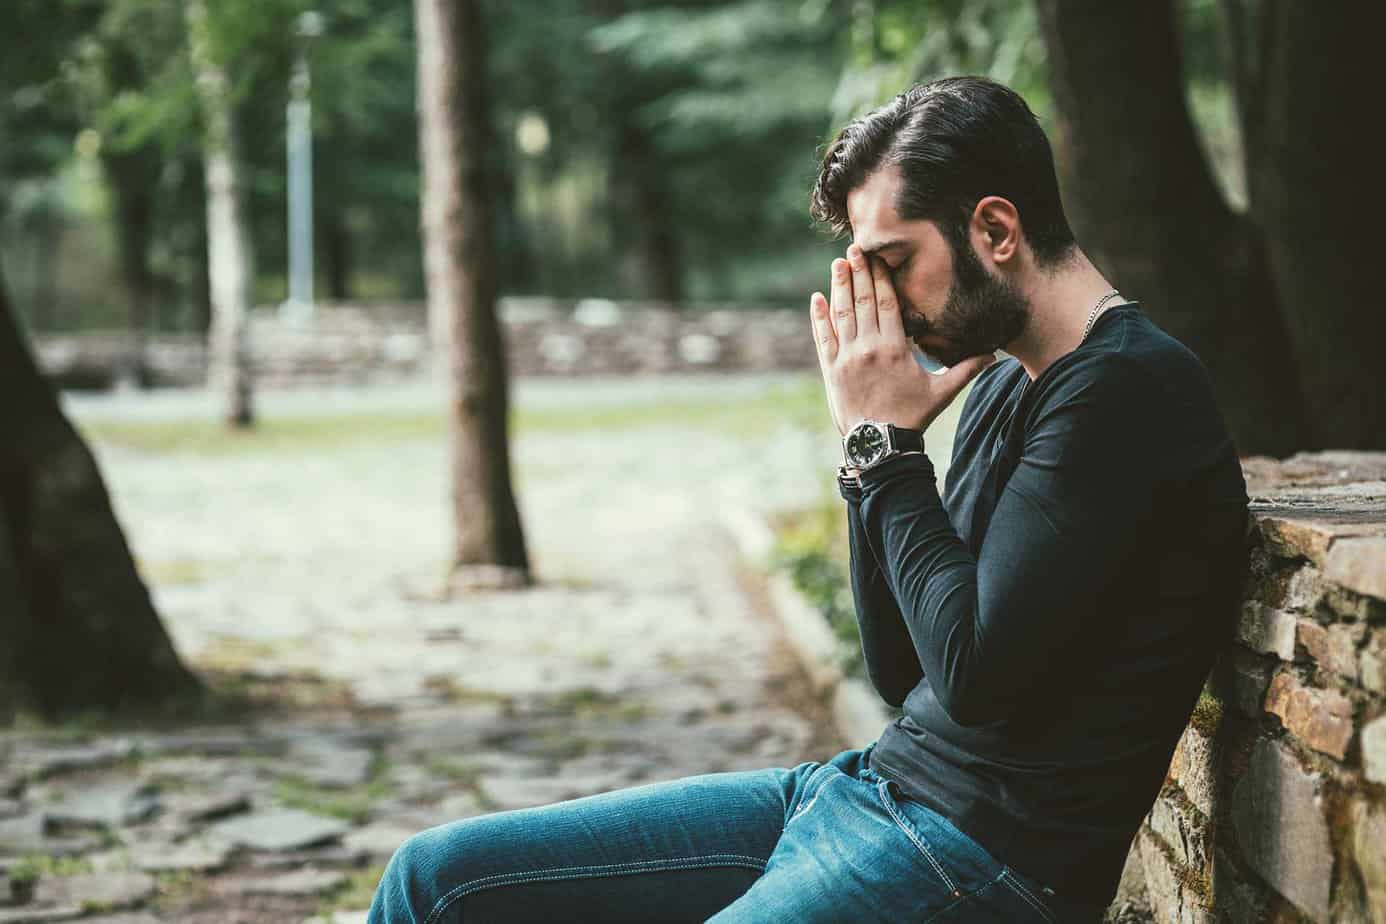 Man in long black shirt and jeans sitting on park bench outside near trees with hands on head in prayer pose